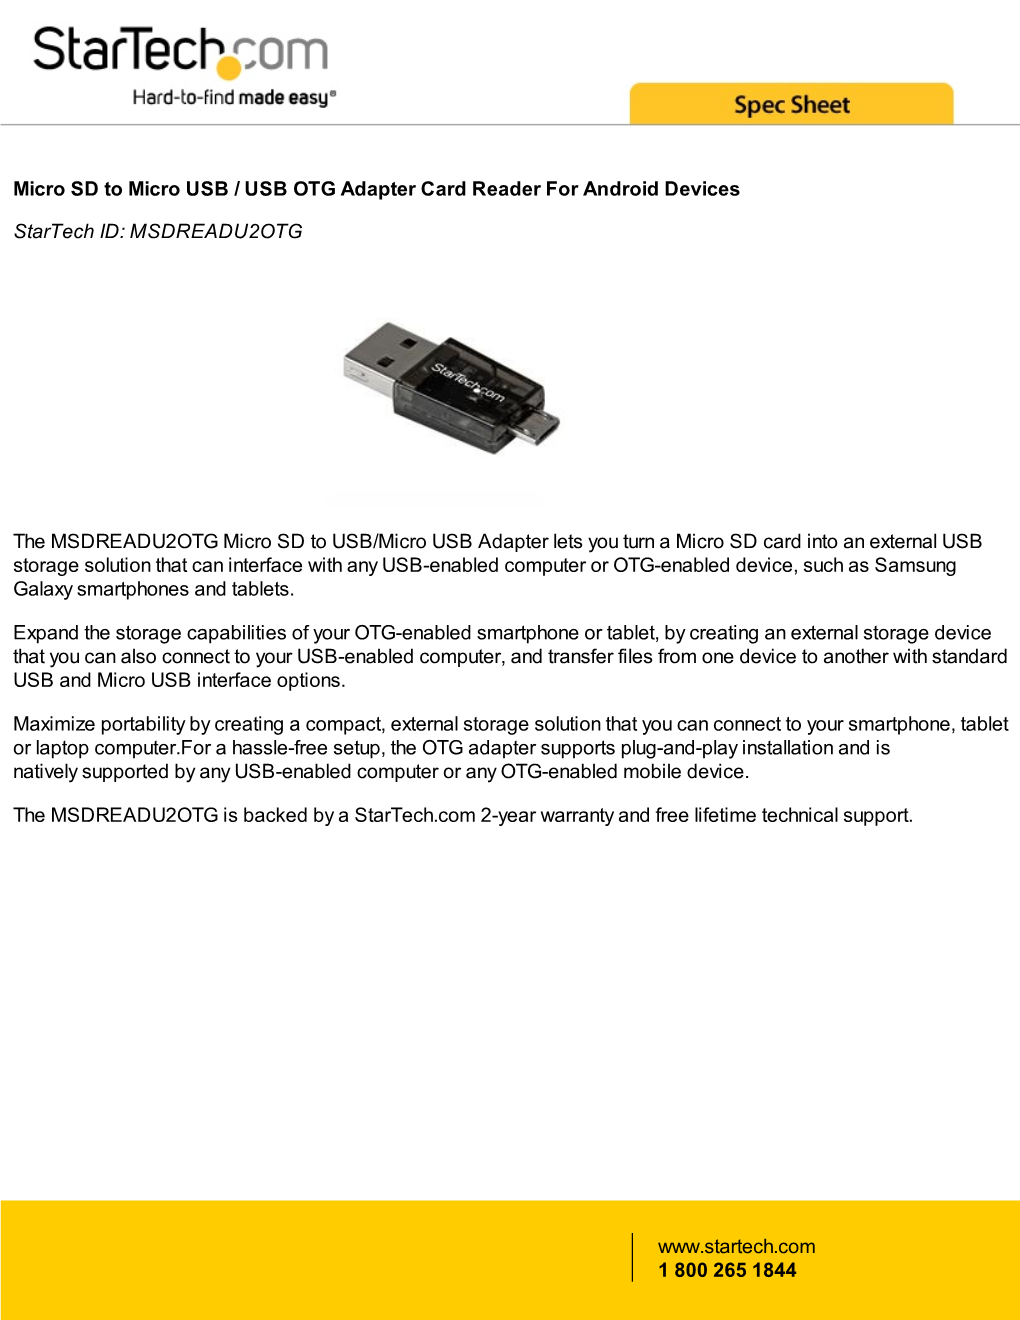 Micro SD to Micro USB / USB OTG Adapter Card Reader for Android Devices